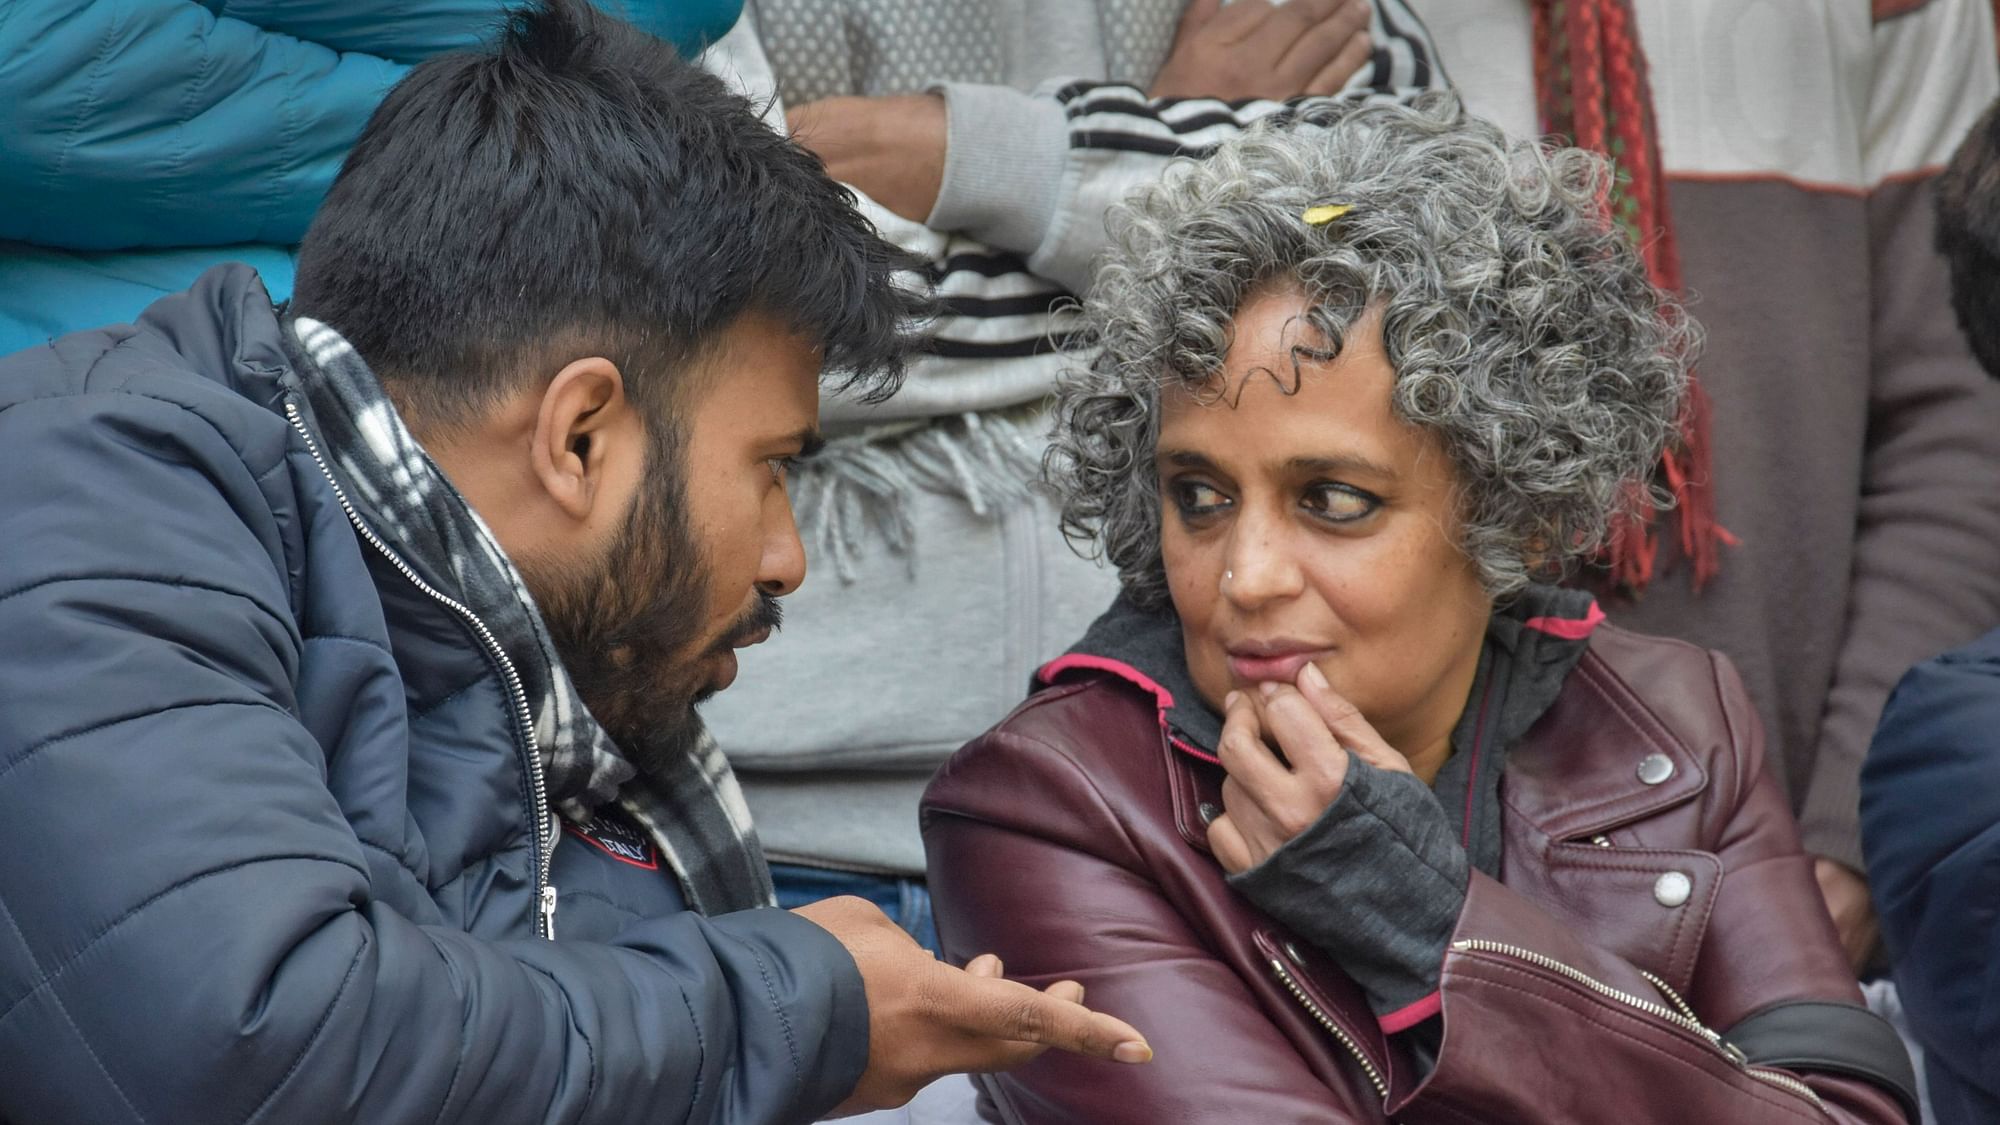 Noted writer-activist Arundhati Roy with Fahad Ahmed, a student at the Tata Institute of Social Science (TISS), during a protest against the amnended Citizenship Act at Delhi University campus in New Delhi.